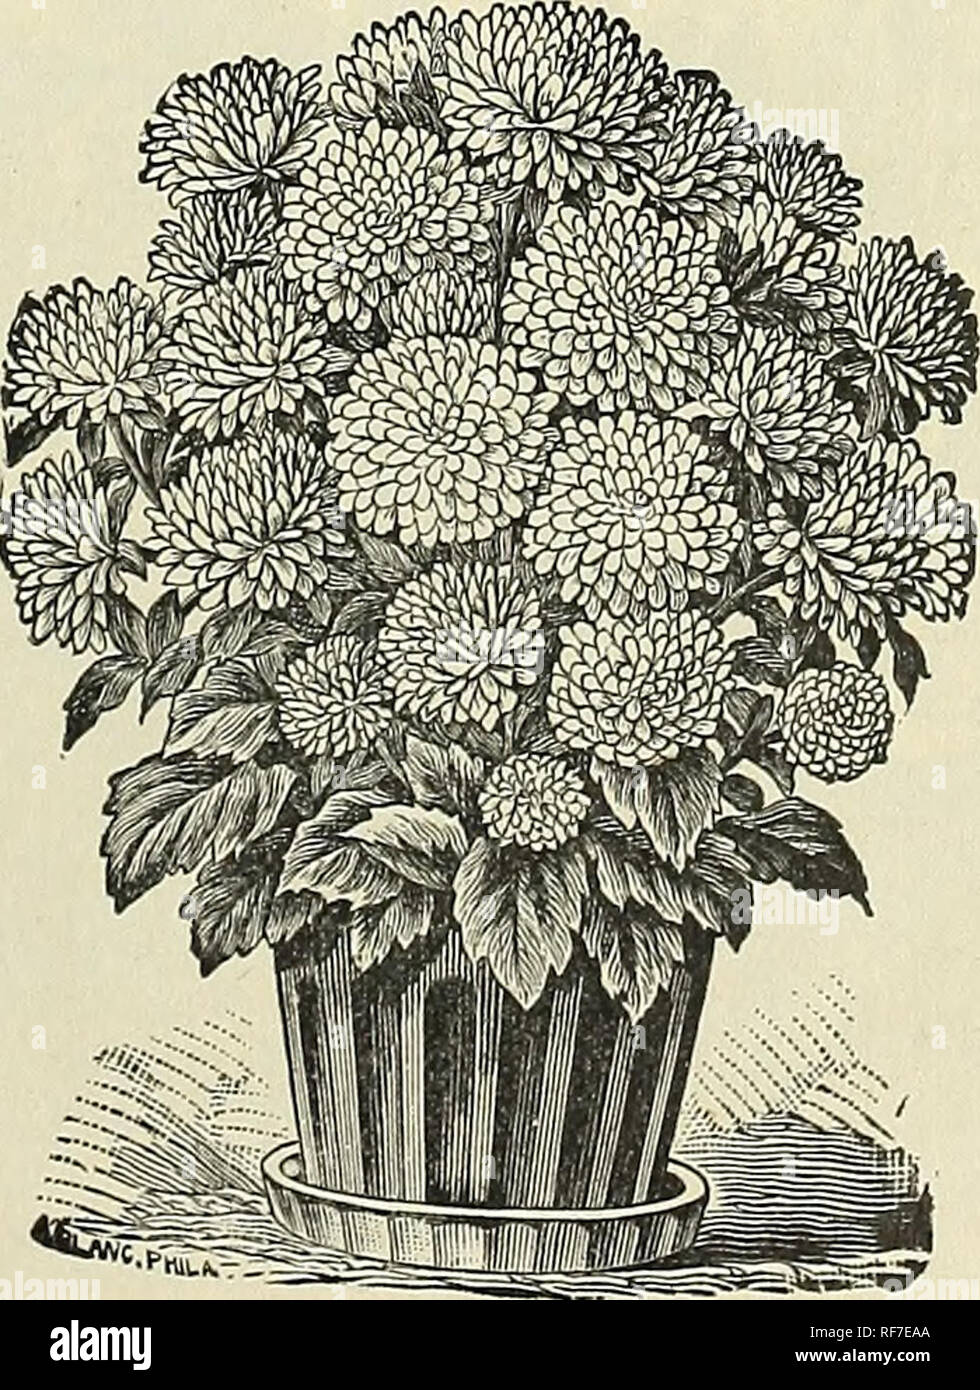 . Vegetable, flower &amp; agricultural seeds : spring 1900. Nursery stock New York (State) New York Catalogs; Vegetables Seeds Catalogs; Grasses Seeds Catalogs; Flowers Seeds Catalogs; Gardening Equipment and supplies Catalogs. DWARF CHRYSANTHEMUM-FLOWERED ASTER, ARNEBIA COKNUTA—Arabian Primrose. PER PKT. The blossoms are of a brilliant yellow color with five large black epots. The latter change into a coffee-brown shade on the second day, and disappear altogether rn the third day of its bloom, so that Sure yellow and spotted flowers are on the same flowering branch. [.A., 2 ft 25 ASPARAGUS PL Stock Photo